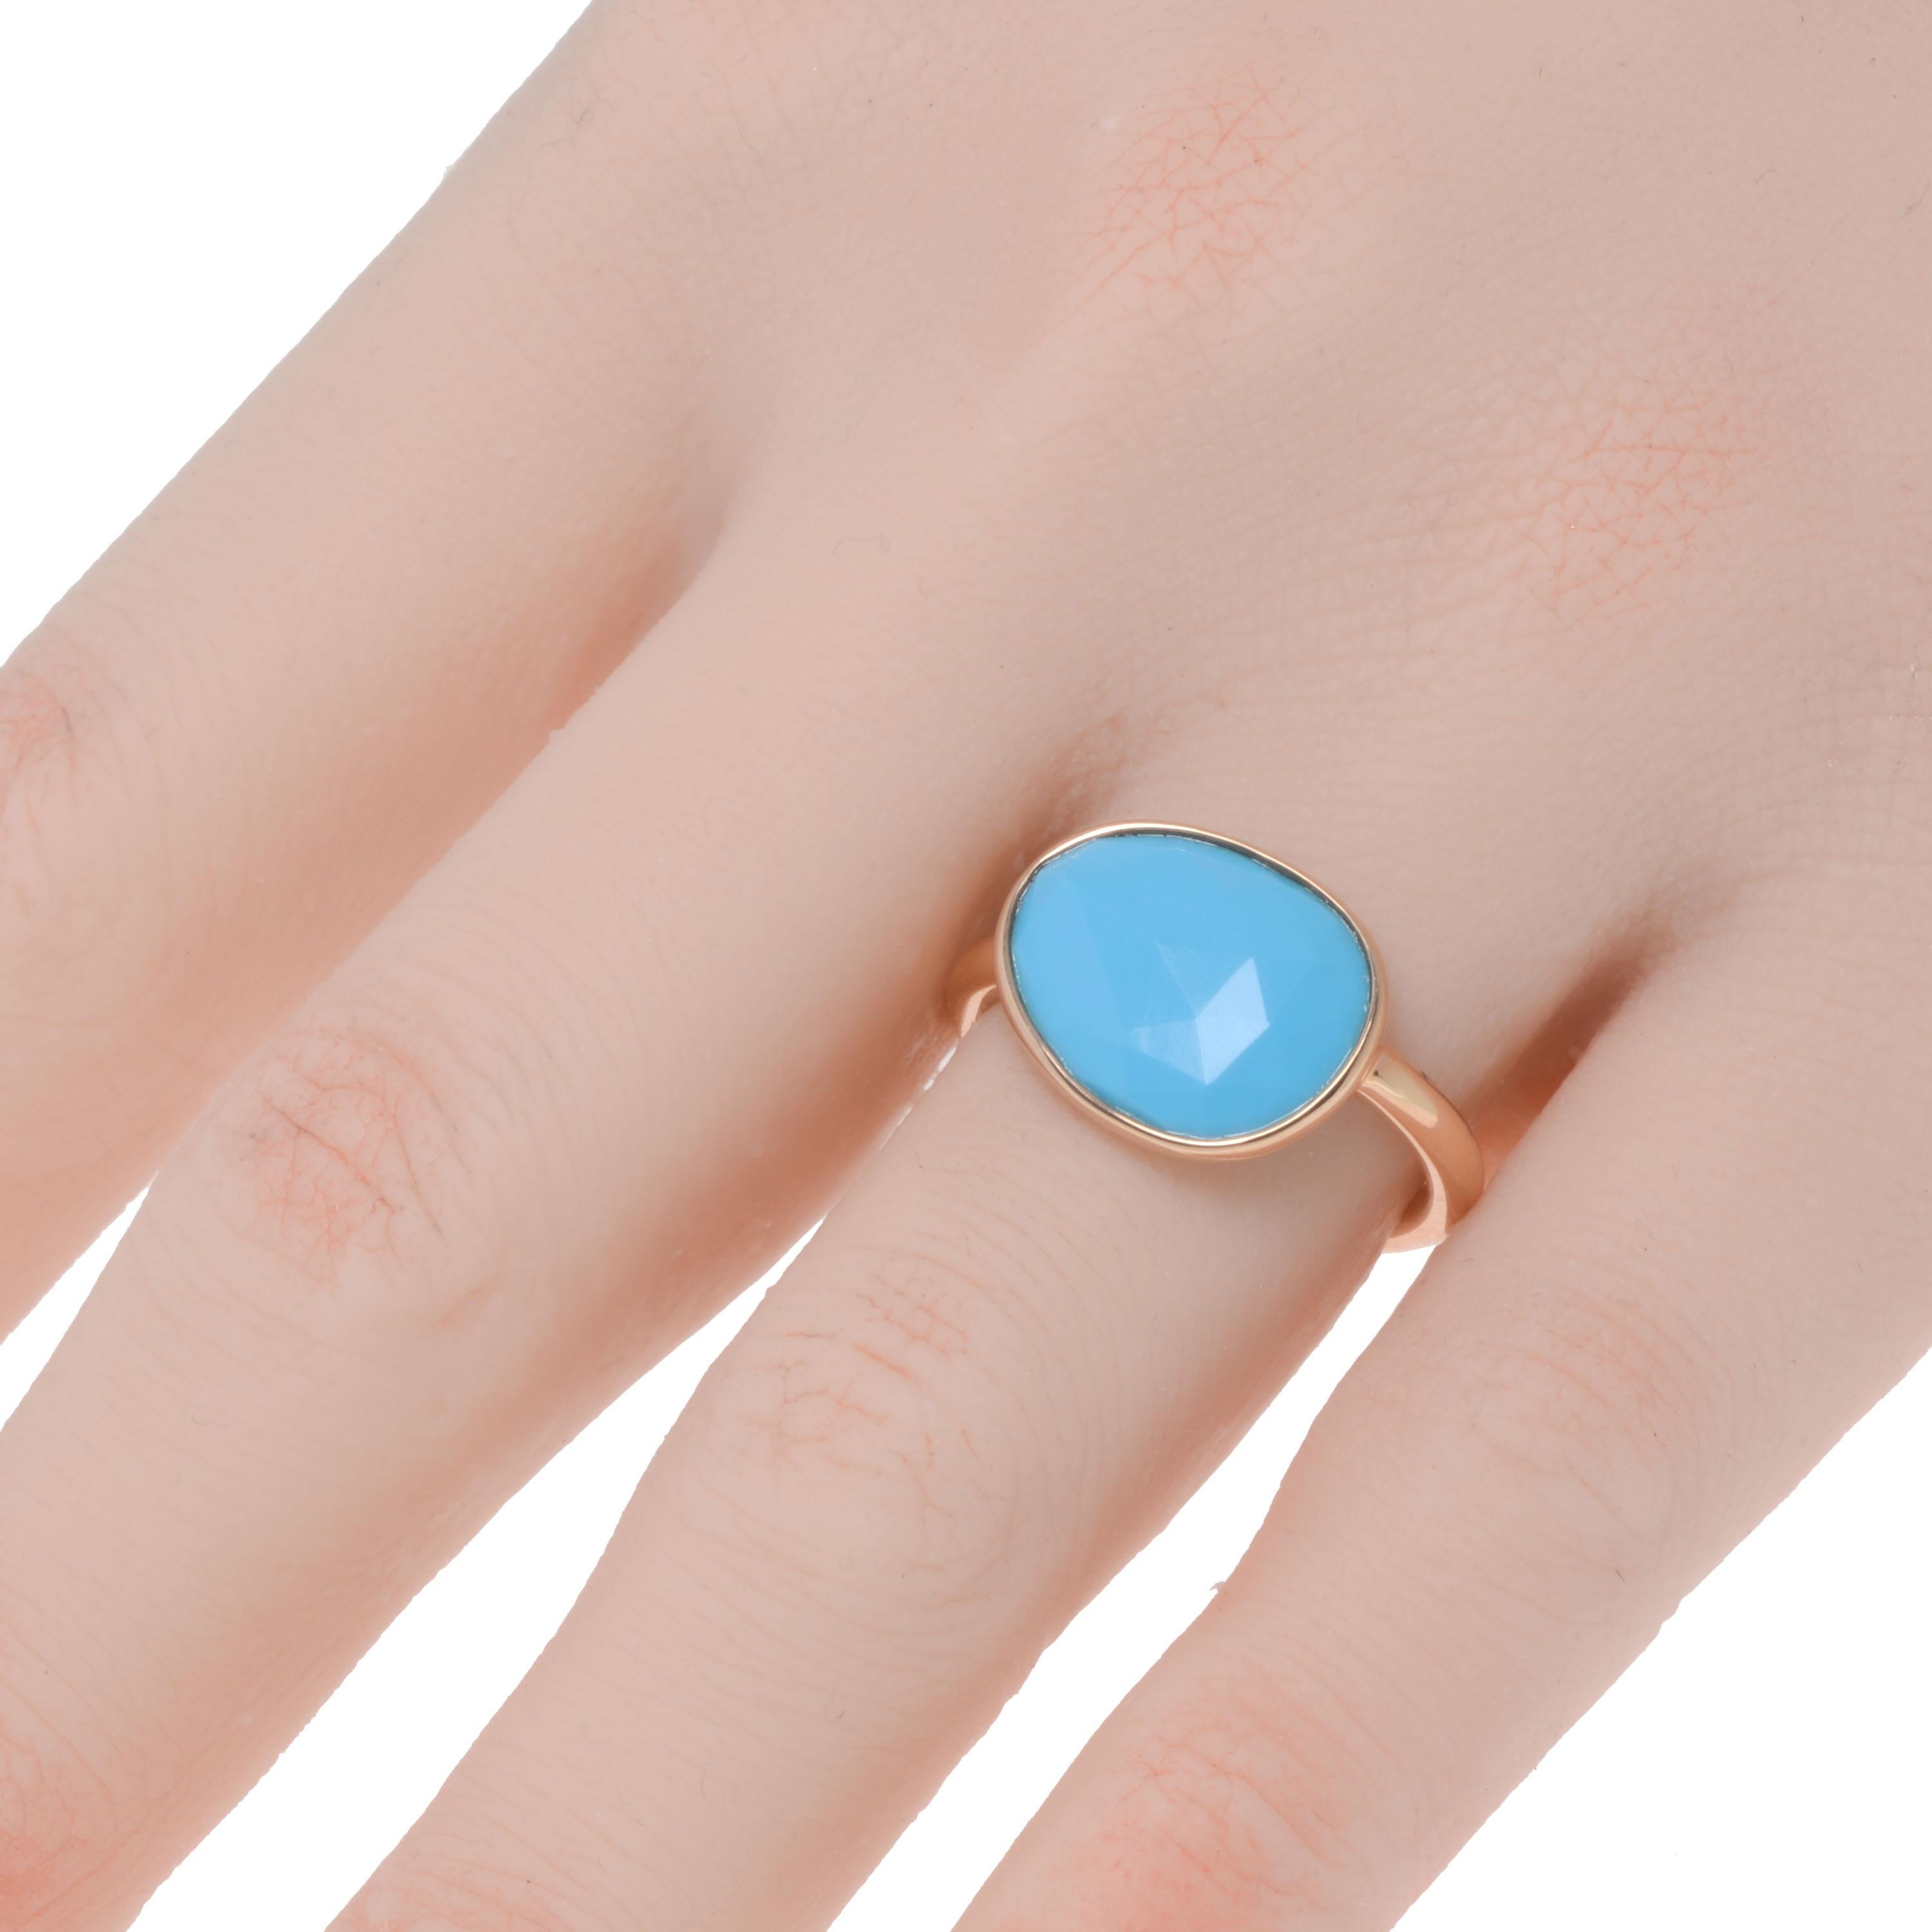 This contemporary Mimi Milano 18K rose gold cocktail ring features a faceted, asymmetrical turquoise framed in shiny 18K rose gold on a thin band. The ring size is 7.5. The decoration size is 5/8